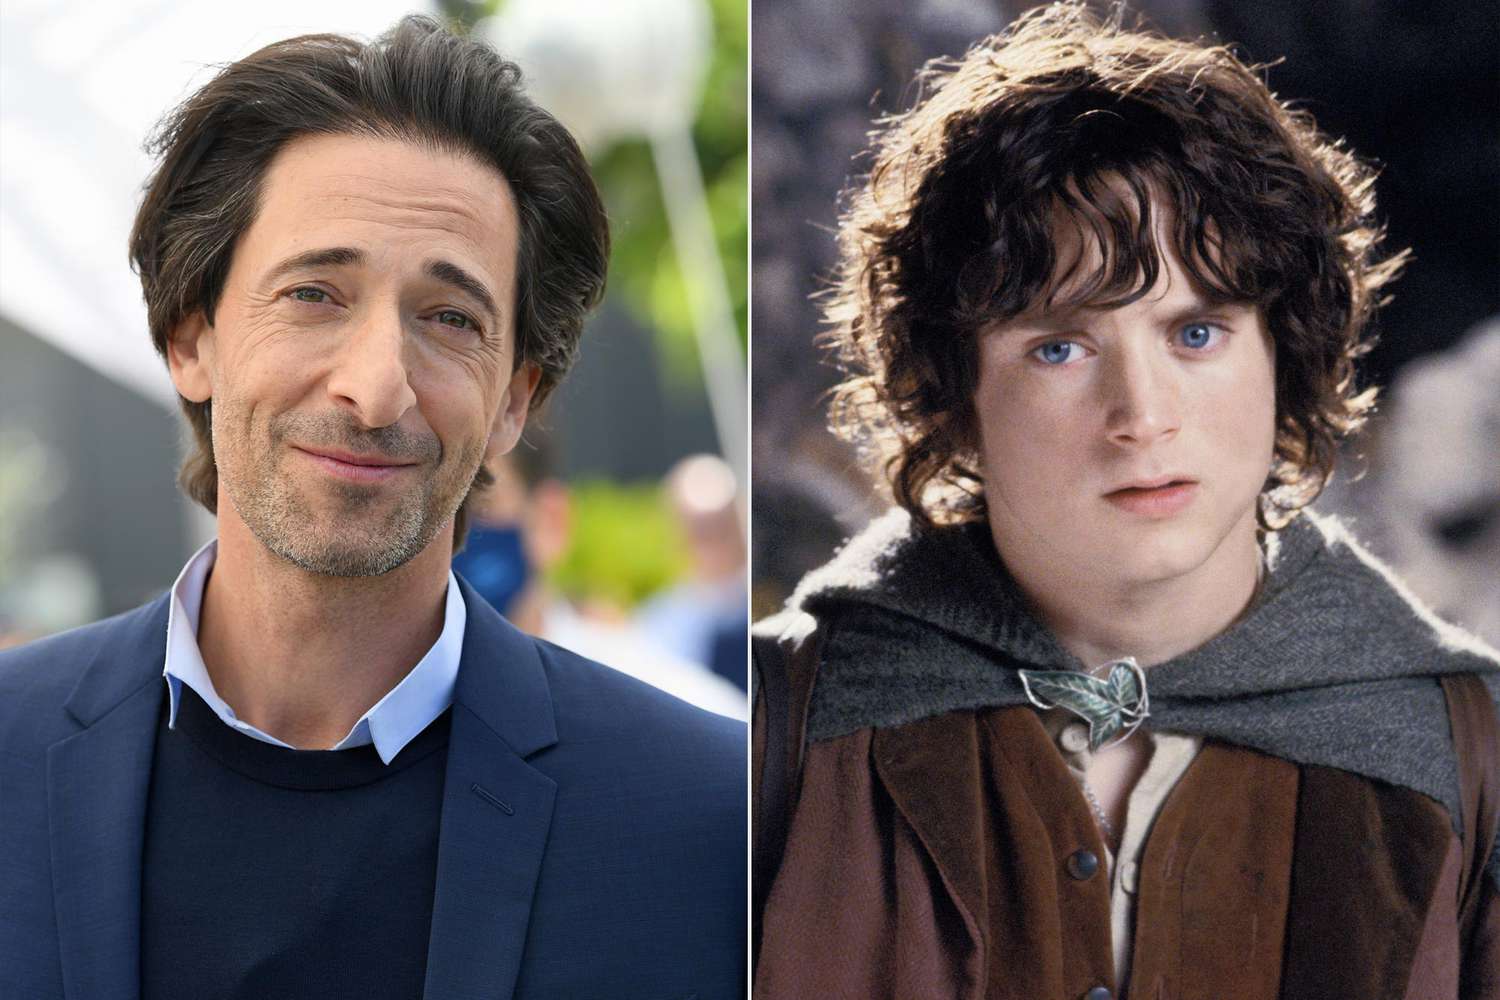 Adrien Brody in Lord of the Rings